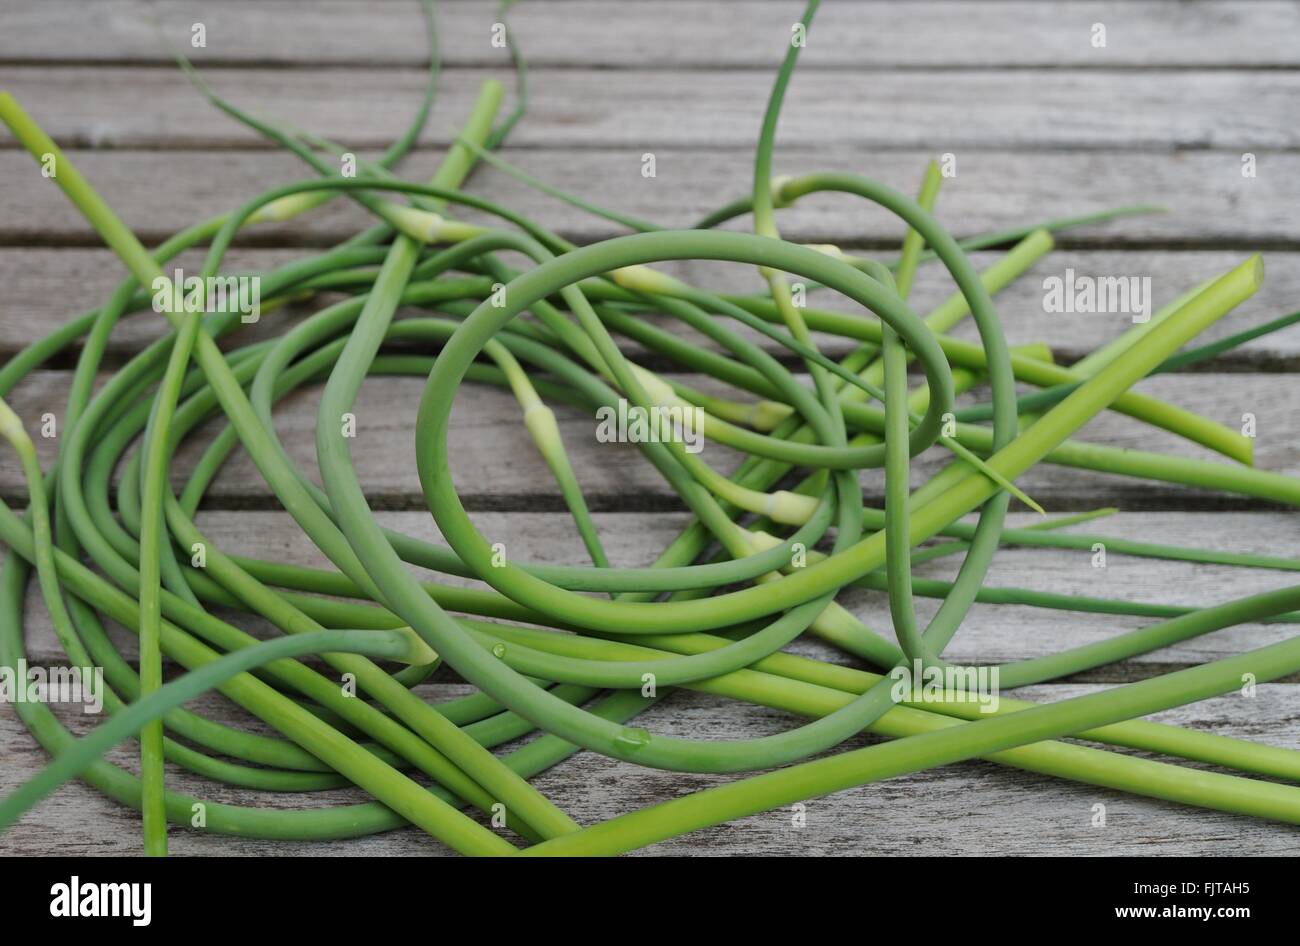 Bunches of freshly picked garlic scape on a wooden table Stock Photo